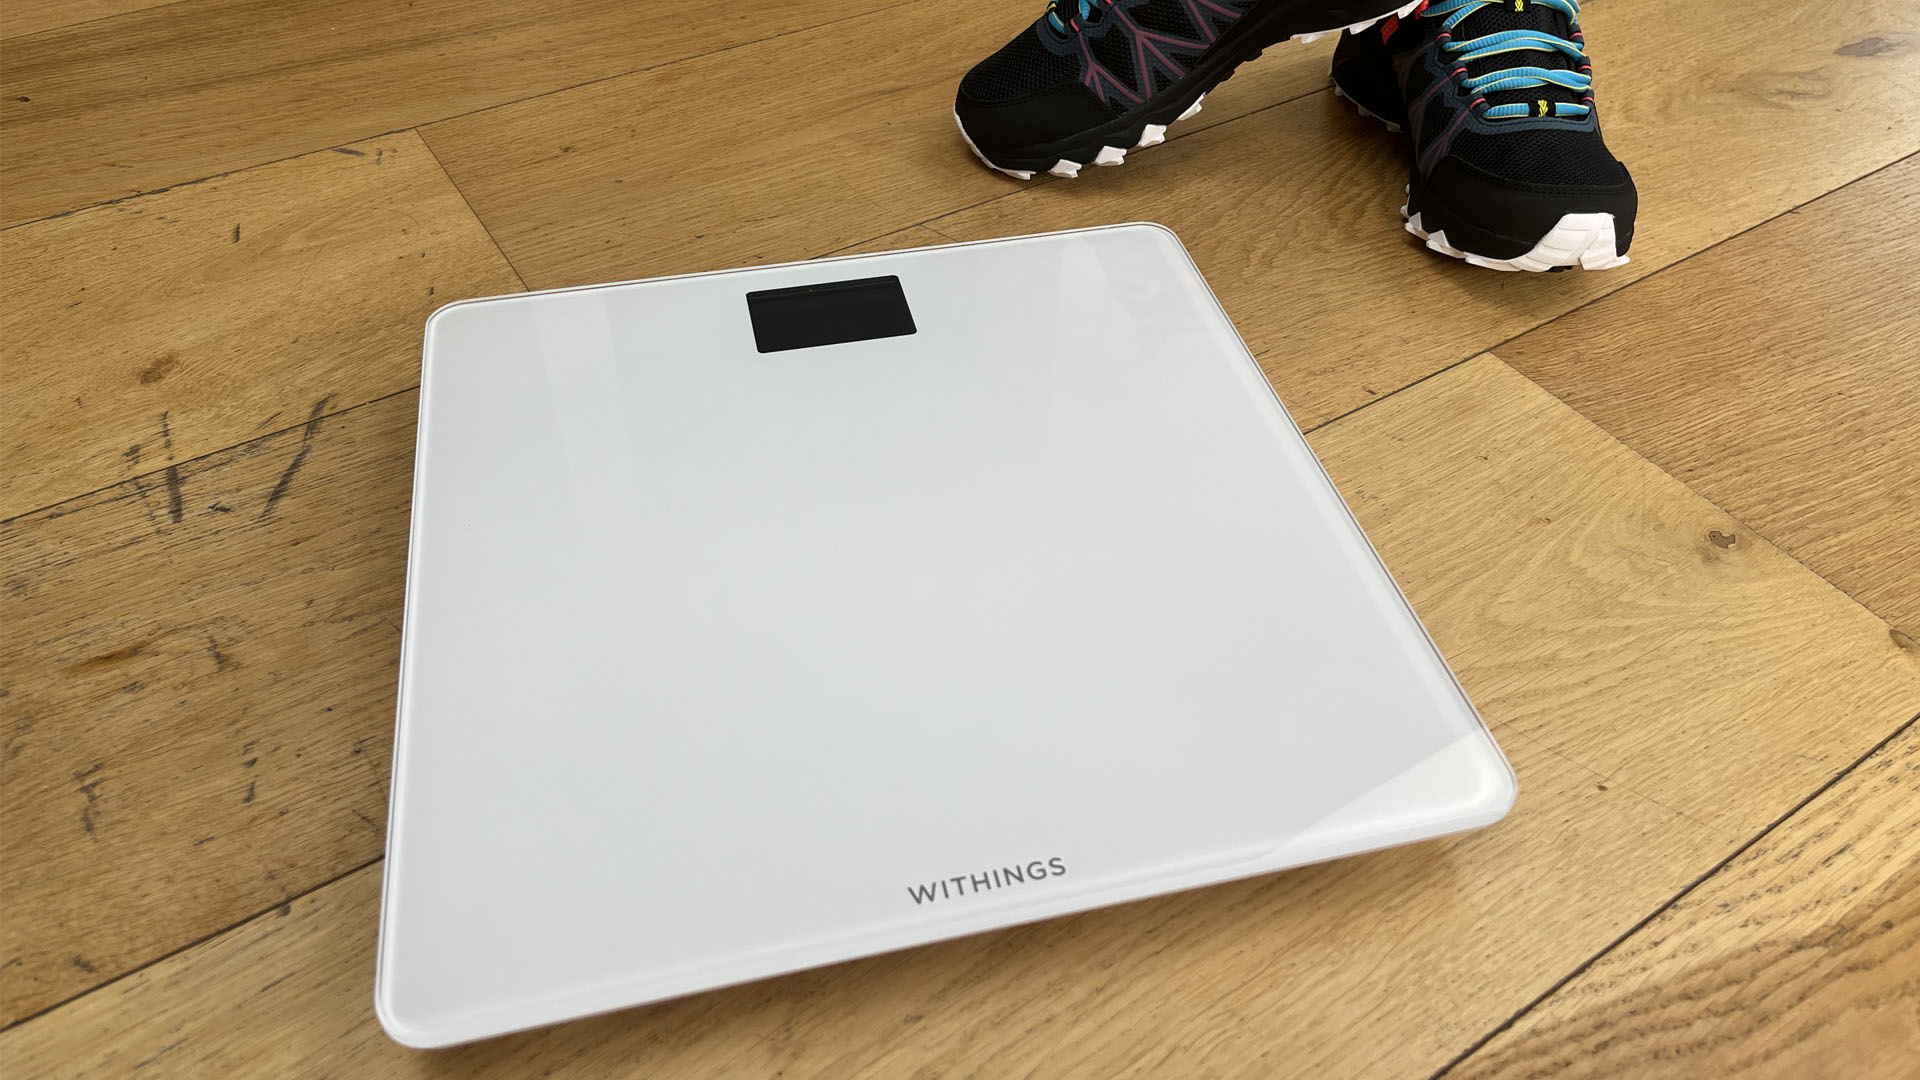 The Withings Body smart scale used by Live Science Contributor Maddy Bidulph